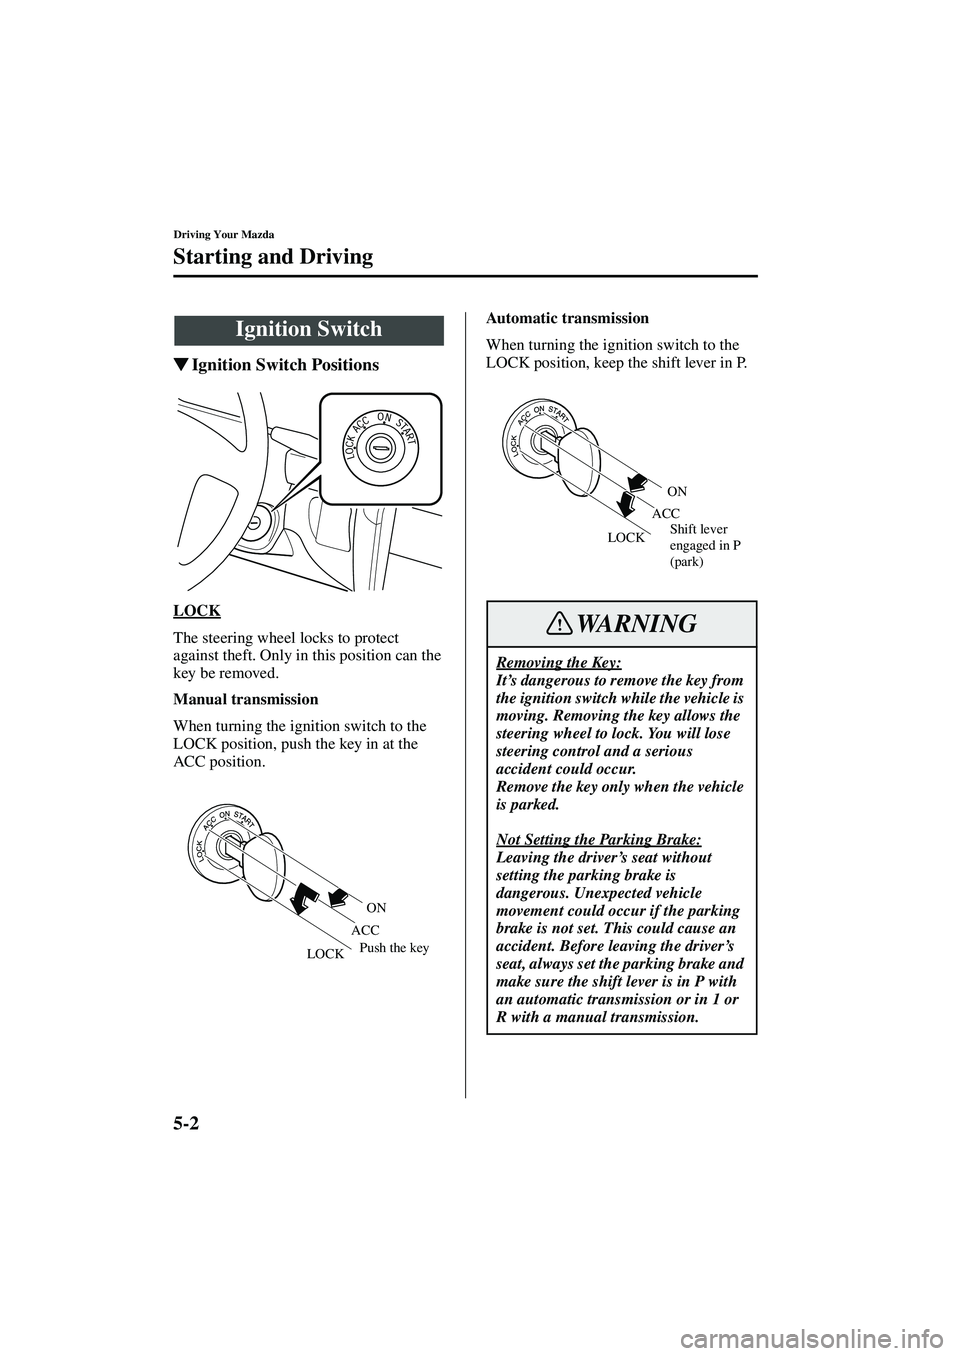 MAZDA MODEL MX-5 MIATA 2002  Owners Manual 5-2
Driving Your Mazda
Form No. 8Q42-EA-01F
Starting and Driving
Ignition Switch Positions
LOCK
The steering wheel locks to protect 
against theft. Only in this position can the 
key be removed.
Manu